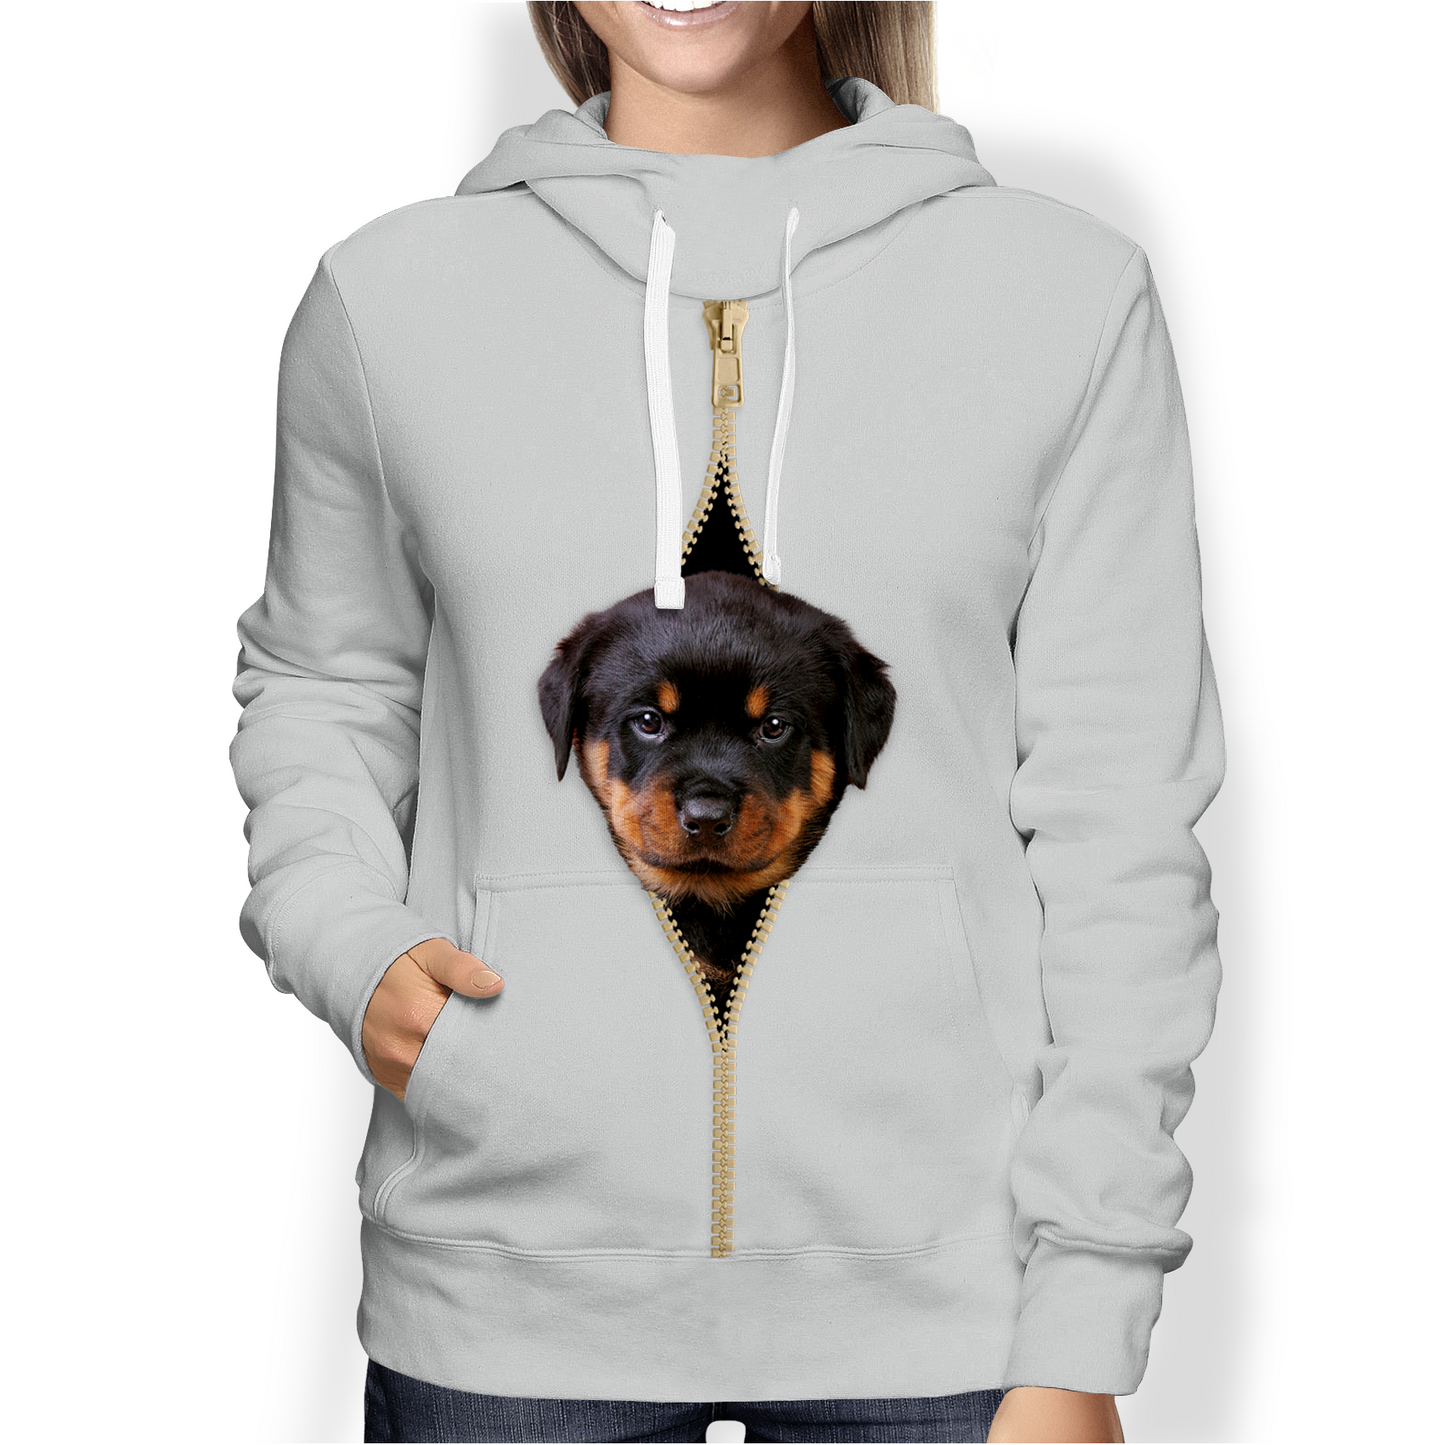 I'm With You - Rottweiler Hoodie V1